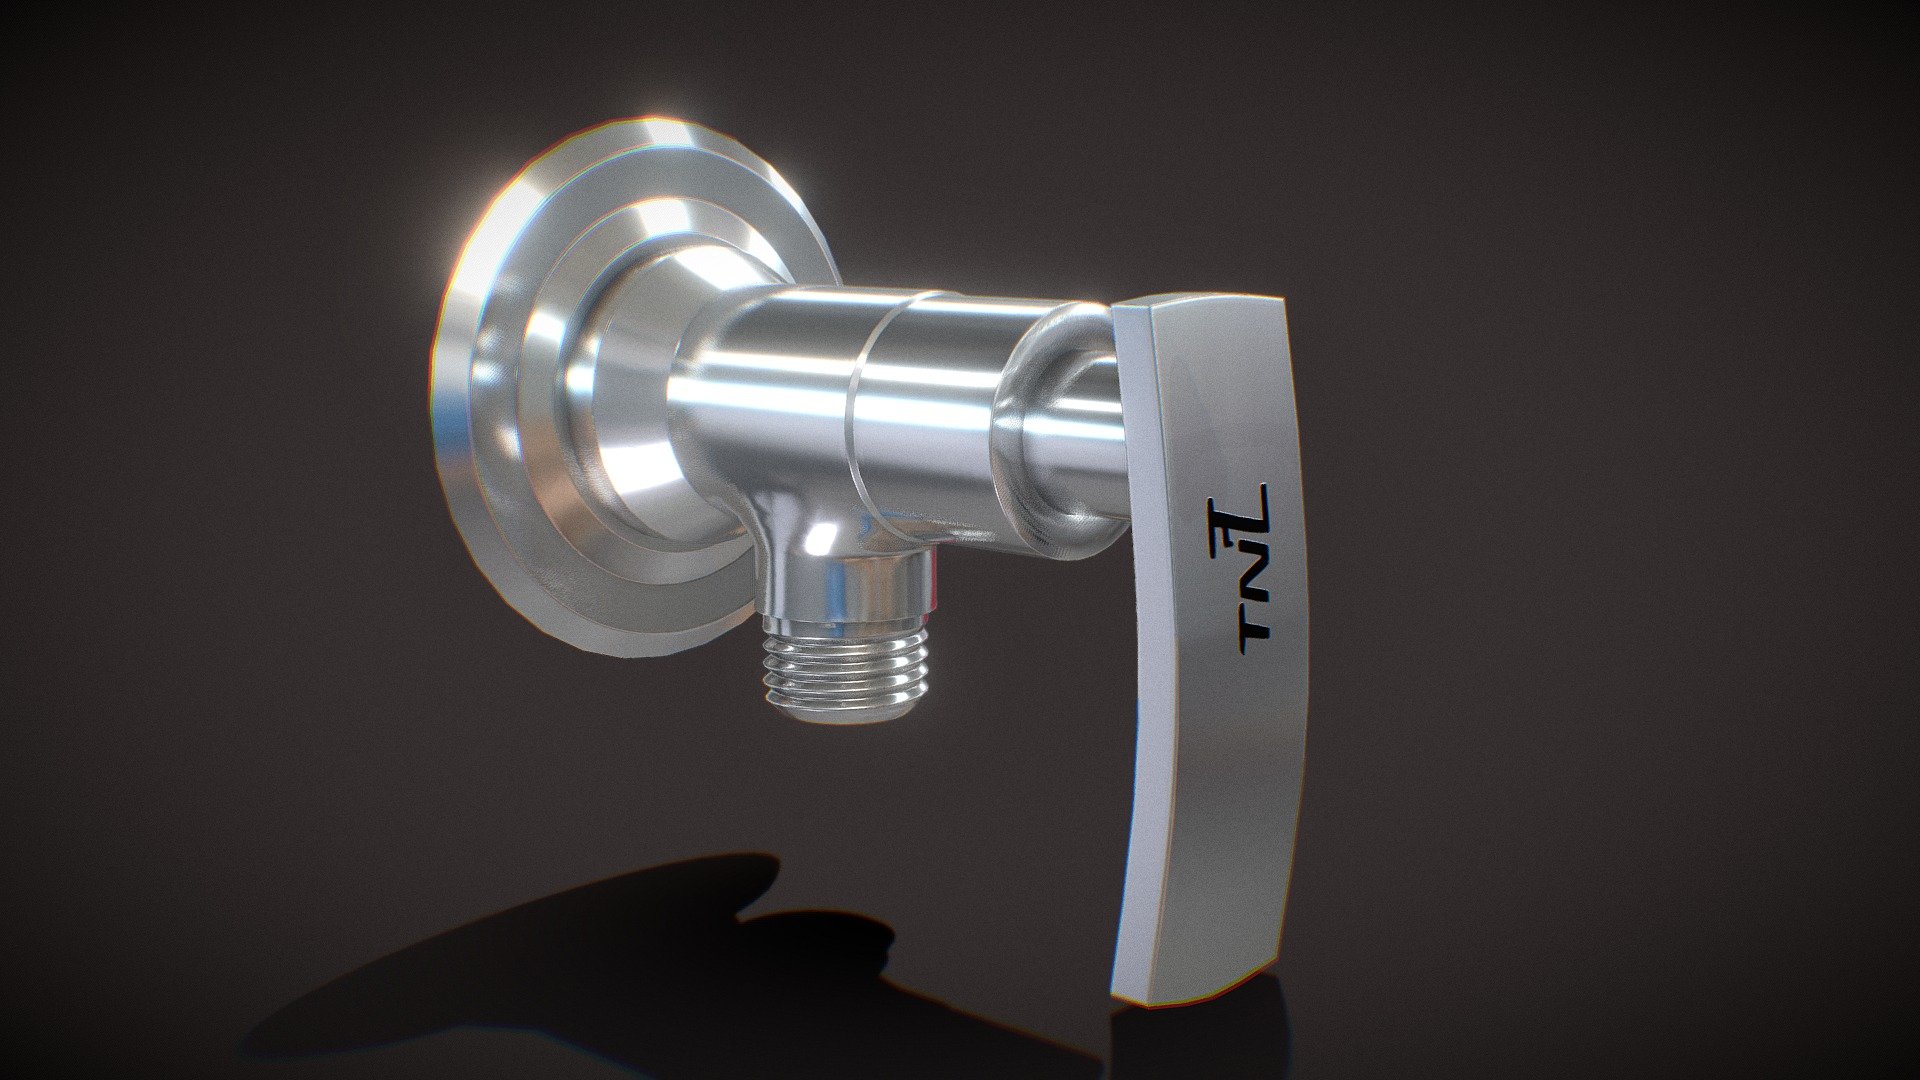 TNL angle valve TAP 3d model ready for VirtualReality(VR),Augmented Reality(AR),games and other render engines.This lowpoly 3d model is baked with 4k resolution textures.The PBR_Maps includes- albedo,roughness,metallic and normal 3d model